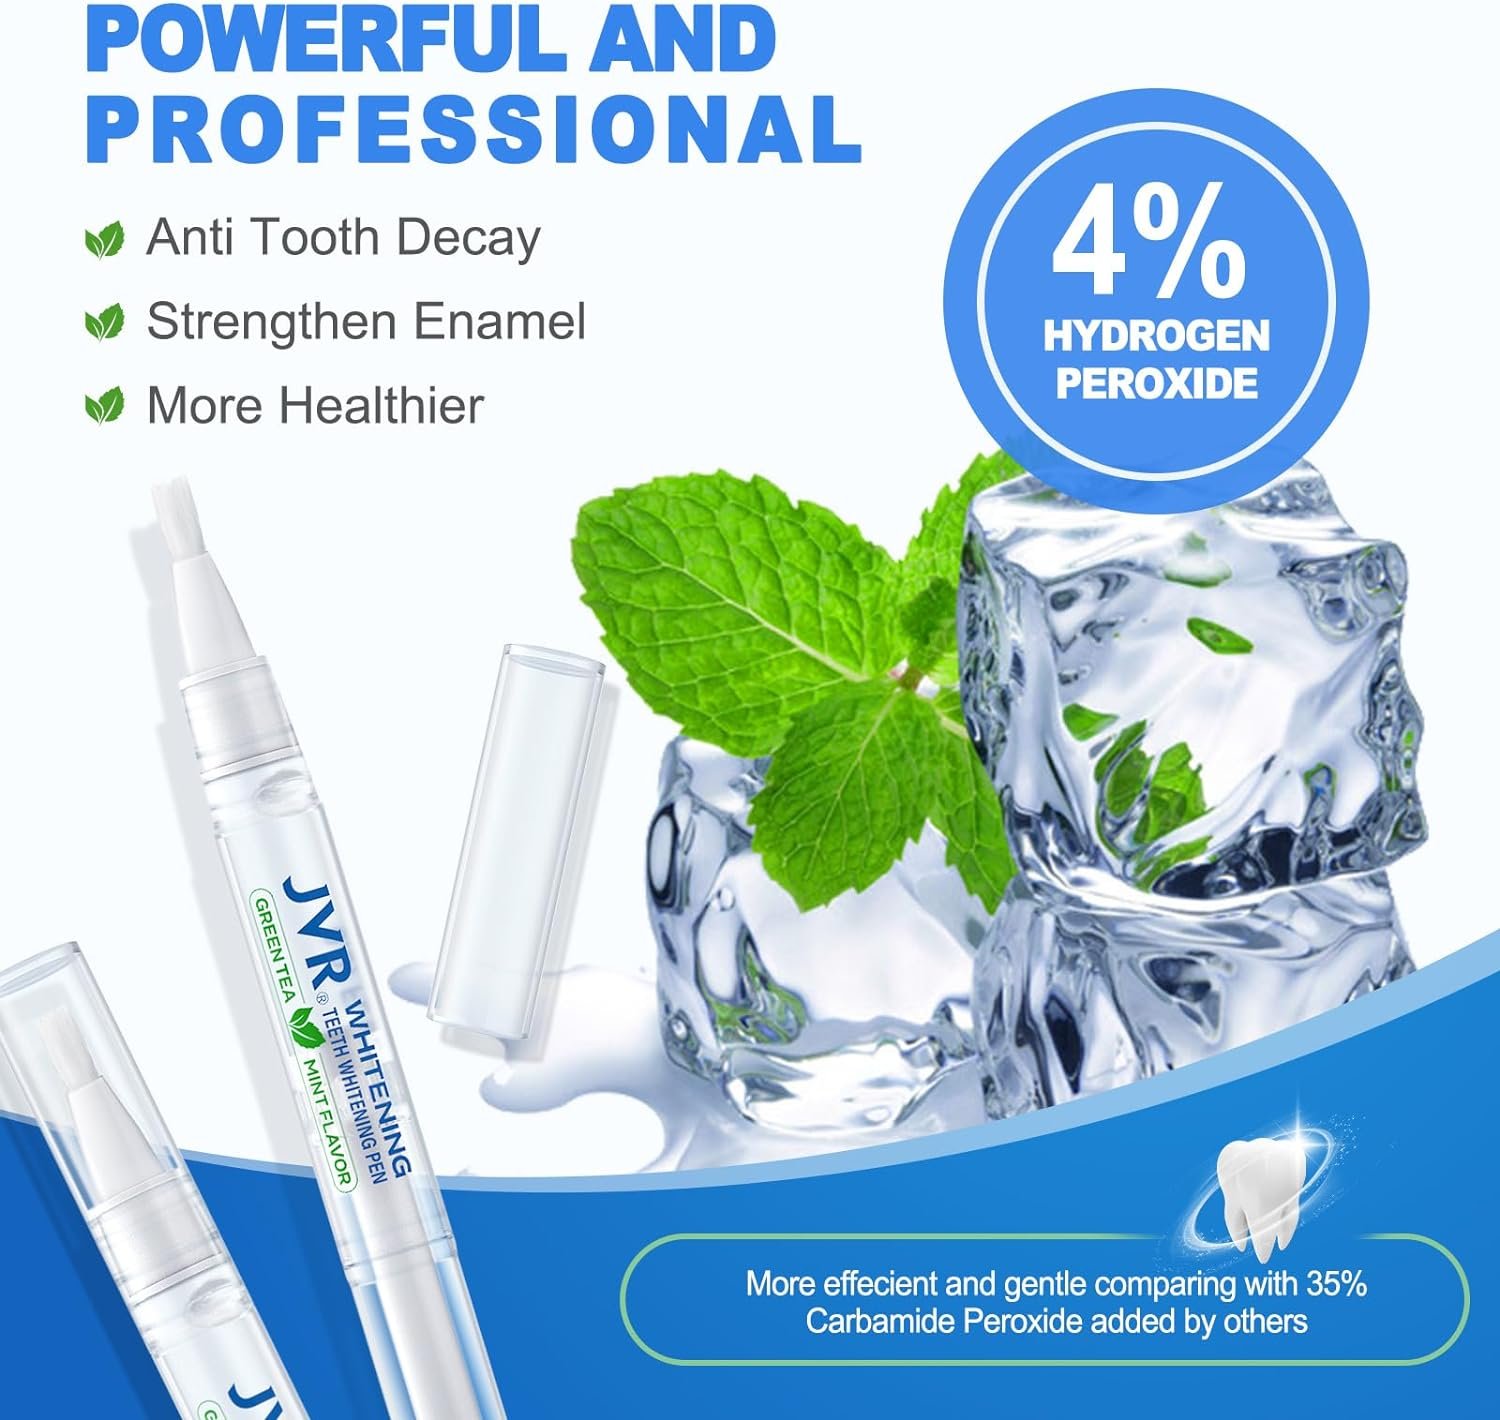 Teeth Whitening Pen (2 Pens), 50+ Uses, Up to 4-8 Shades Whiter in 2-3 Weeks, Effective, Painless, No Sensitivity, Travel-Friendly, Enamel Safe, Natural Mint Flavor